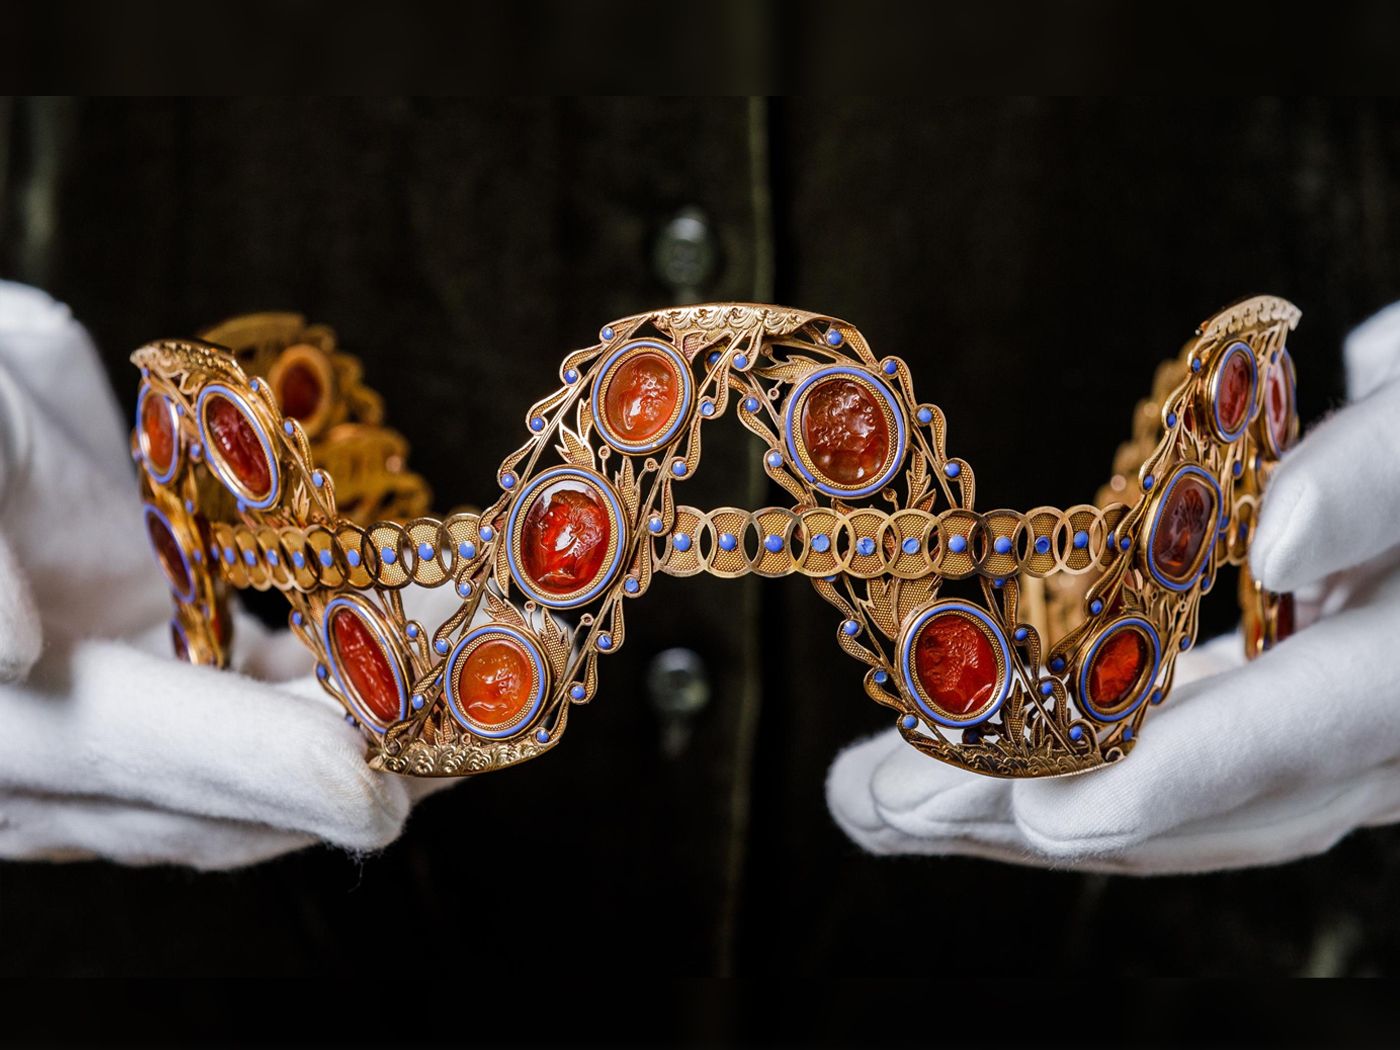 Two Tiaras Once Owned by Josephine Bonaparte Are Up for Auction | Smart News